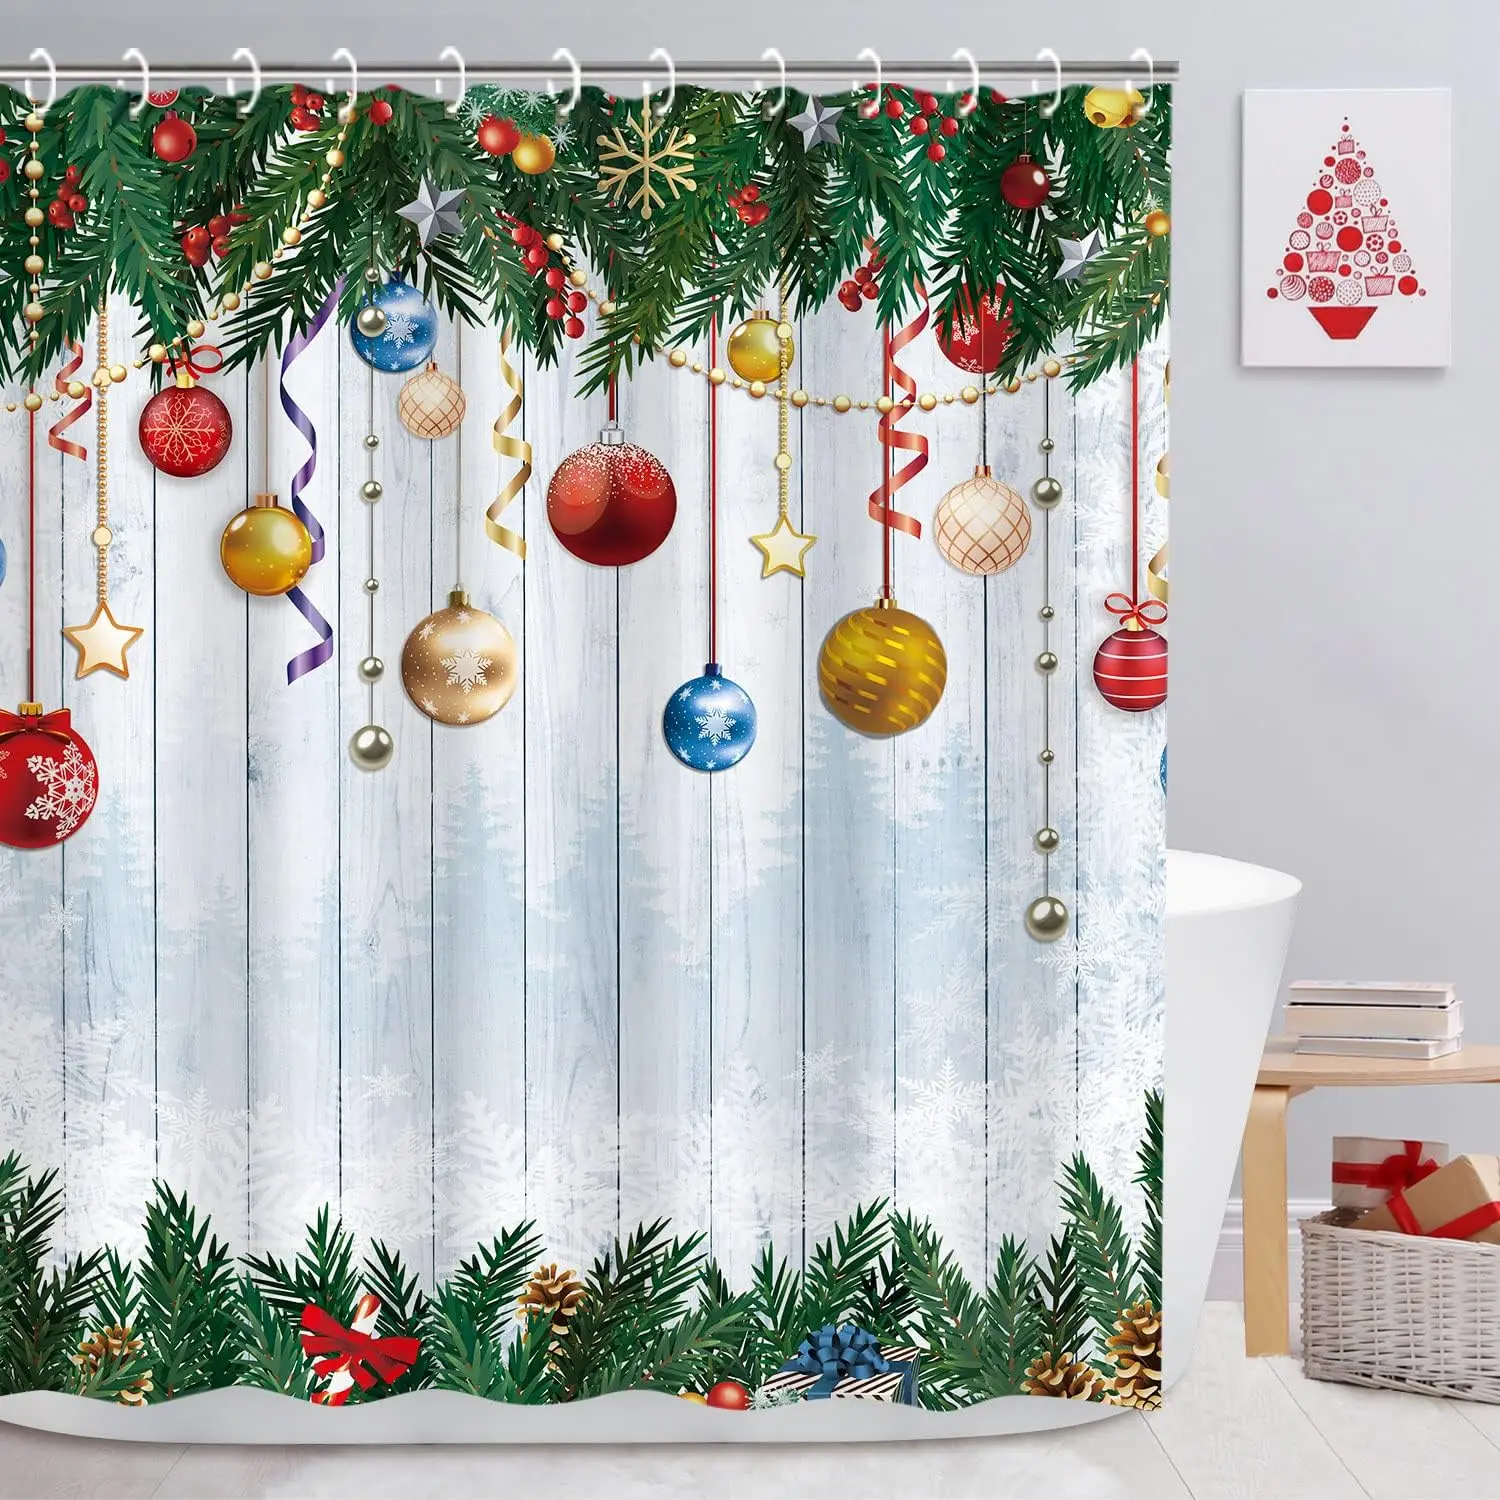 

Christmas Gifts Shower Curtain Christmas Baubles in Pine Branches Christmas Holiday Bathroom Decorations